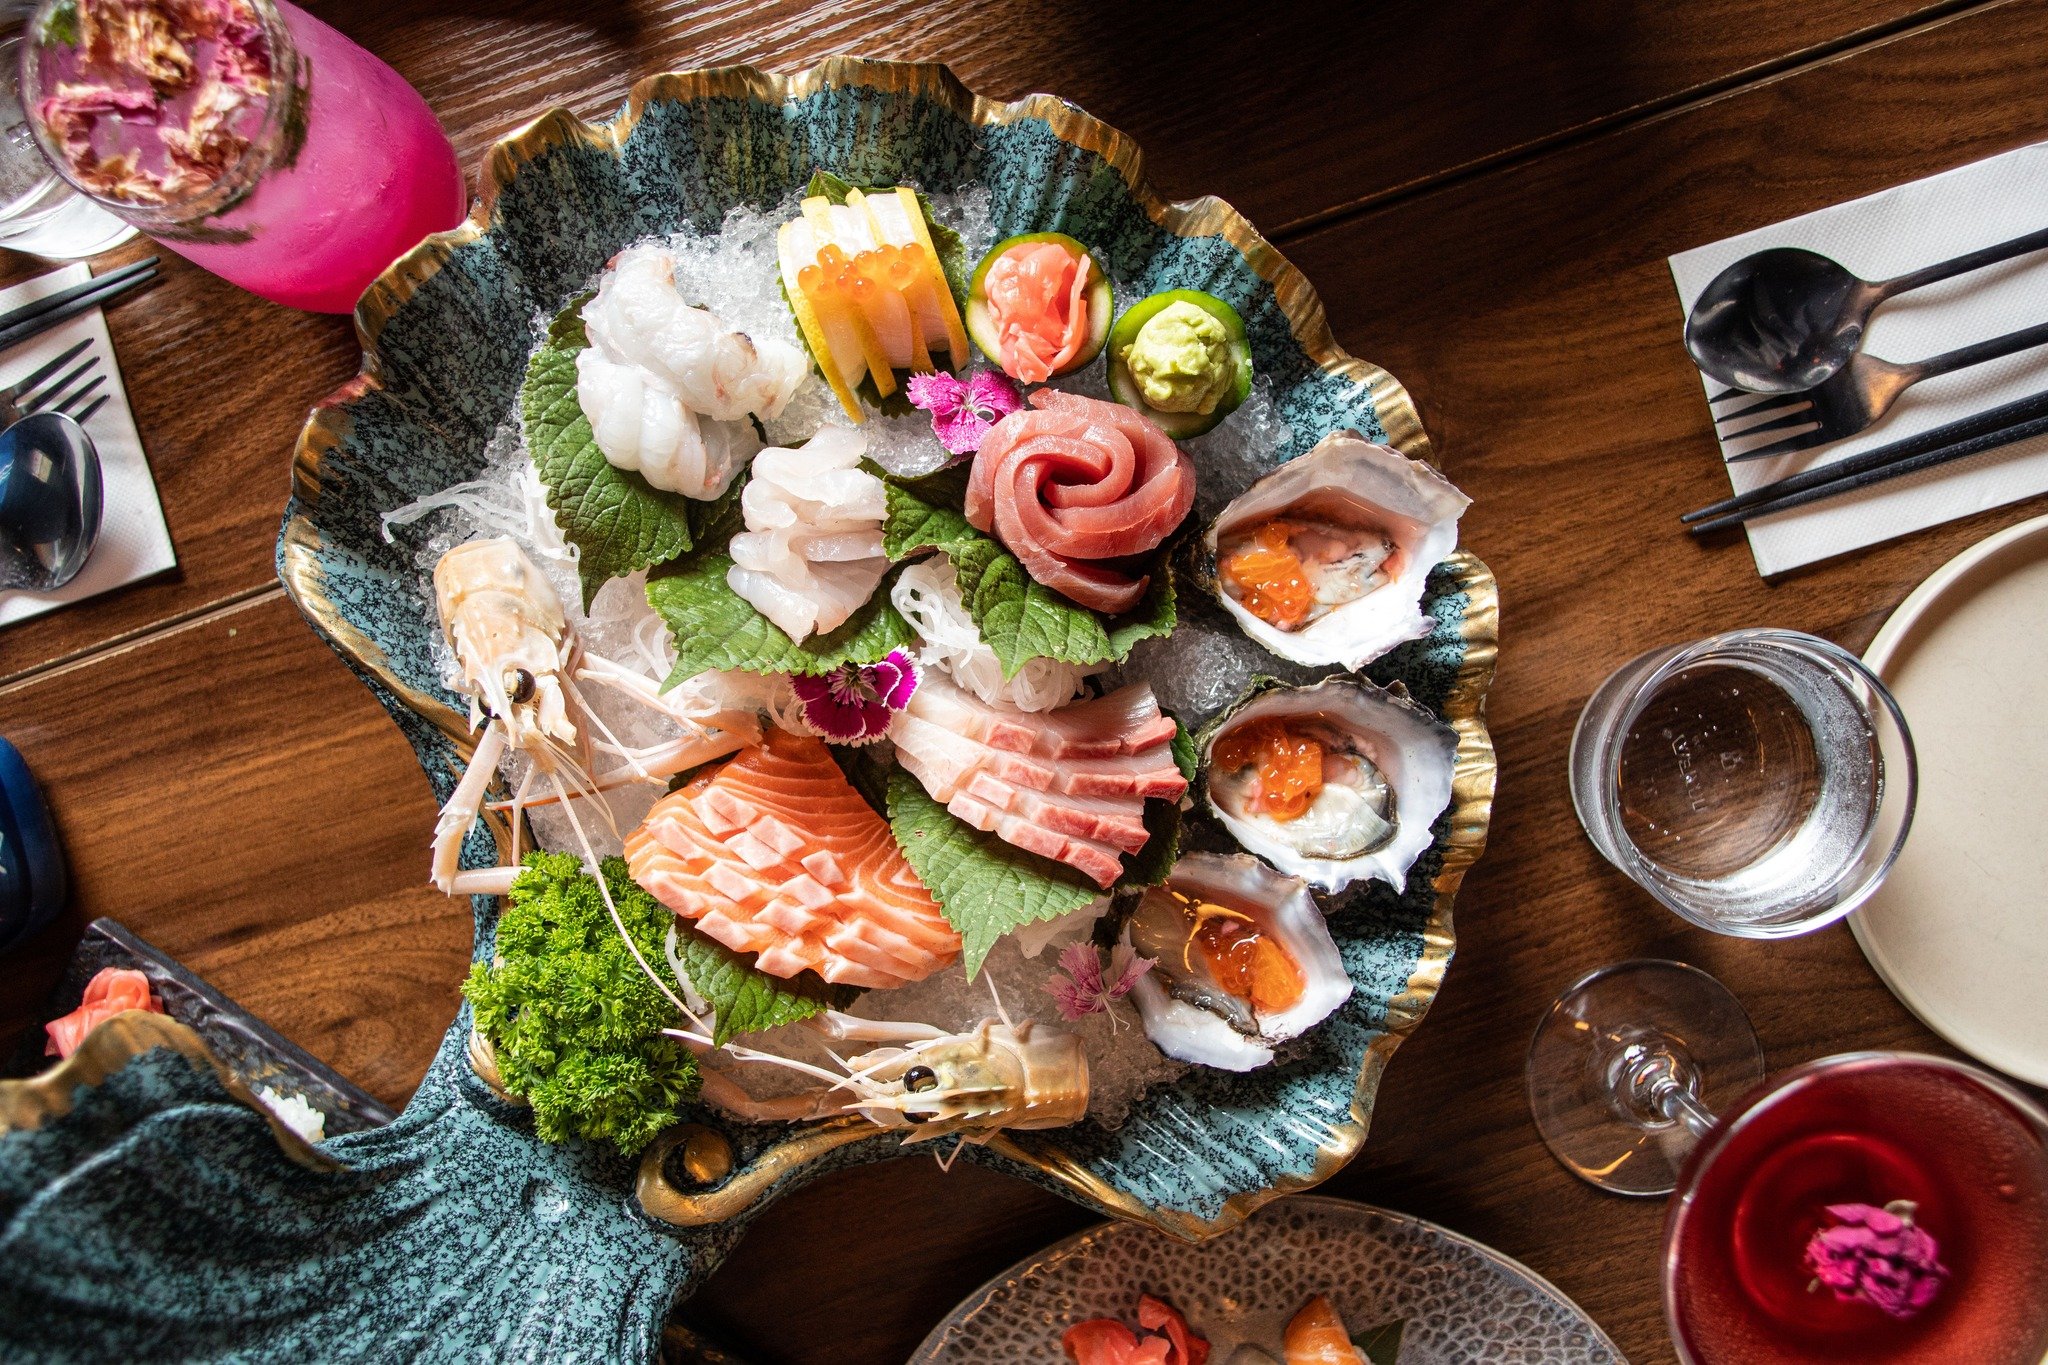 Seafood lovers, rejoice! 

Our Deluxe Sashimi Platter at Chop Chop is a treasure trove of ocean delights, with 24 pieces featuring kingfish, salmon, tuna, oyster, scampi, snapper, and scallop.

#ChopChop #Canberra #Restaurant